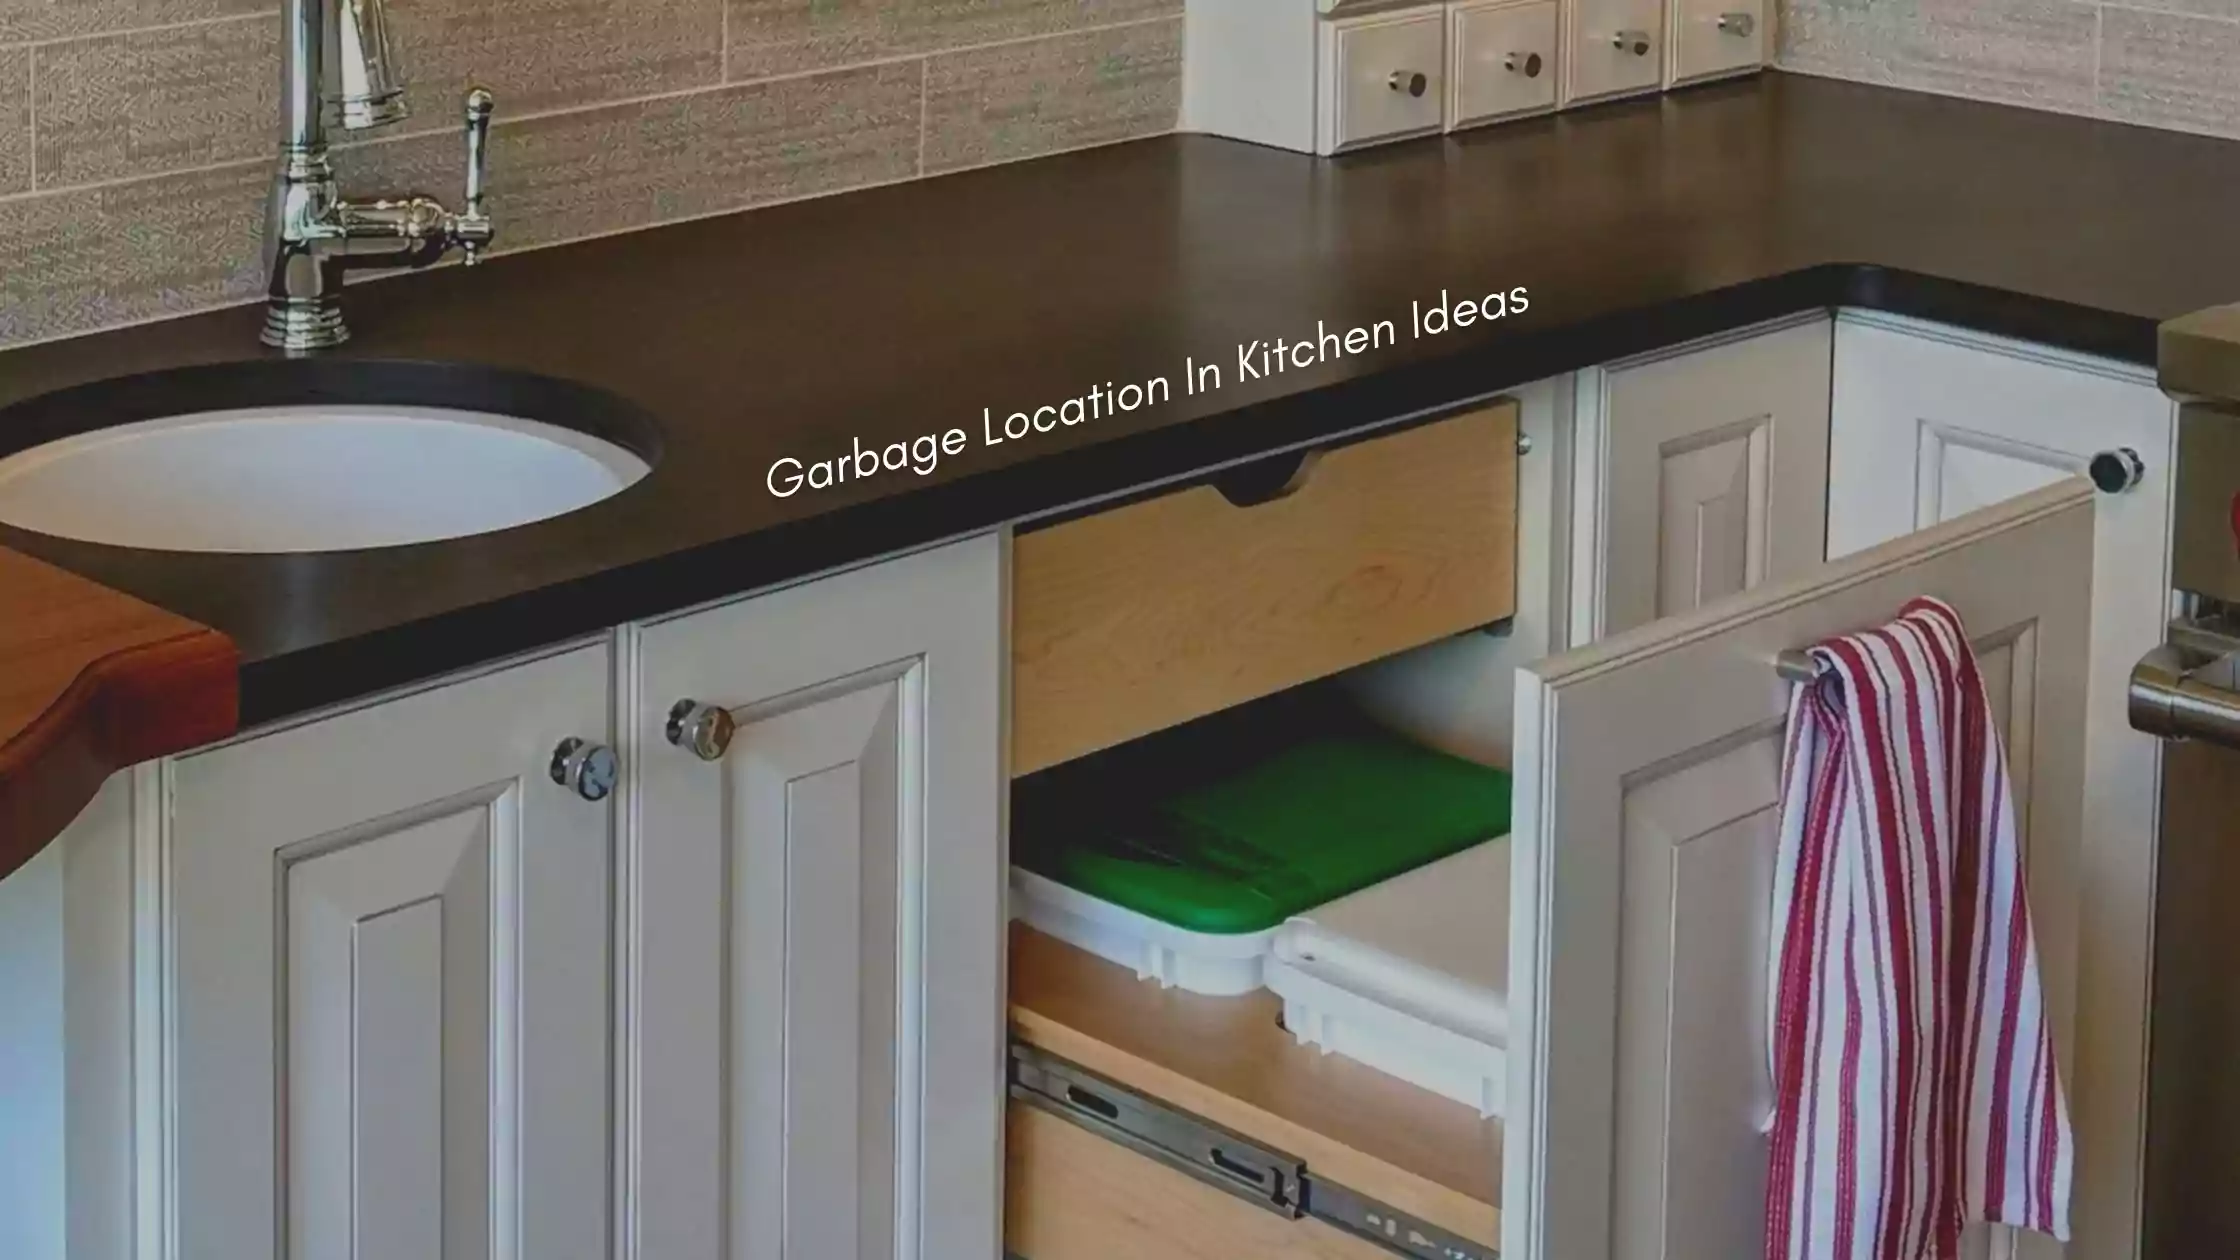 BEST LOCATION FOR GARBAGE CAN IN KITCHEN